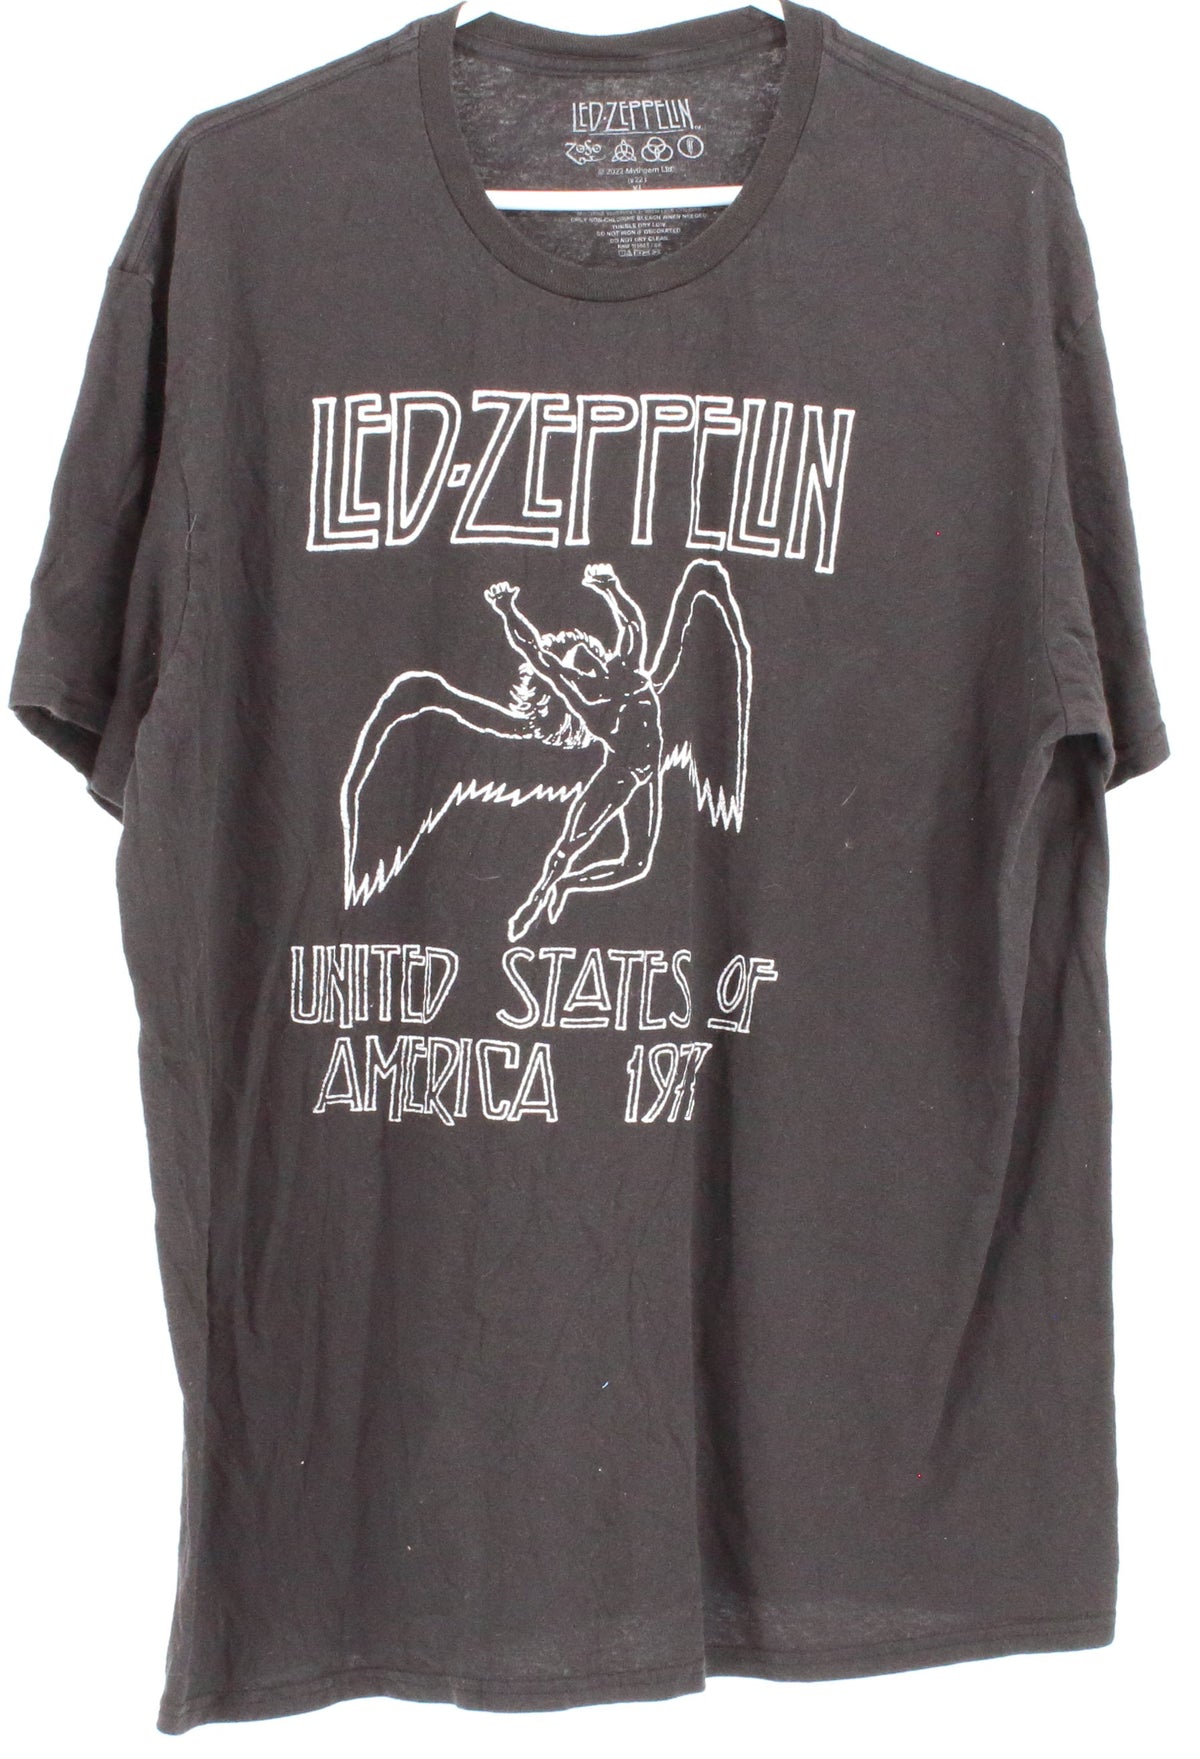 Led Zeppelin Black USA 1977 Front Graphic T-Shirt